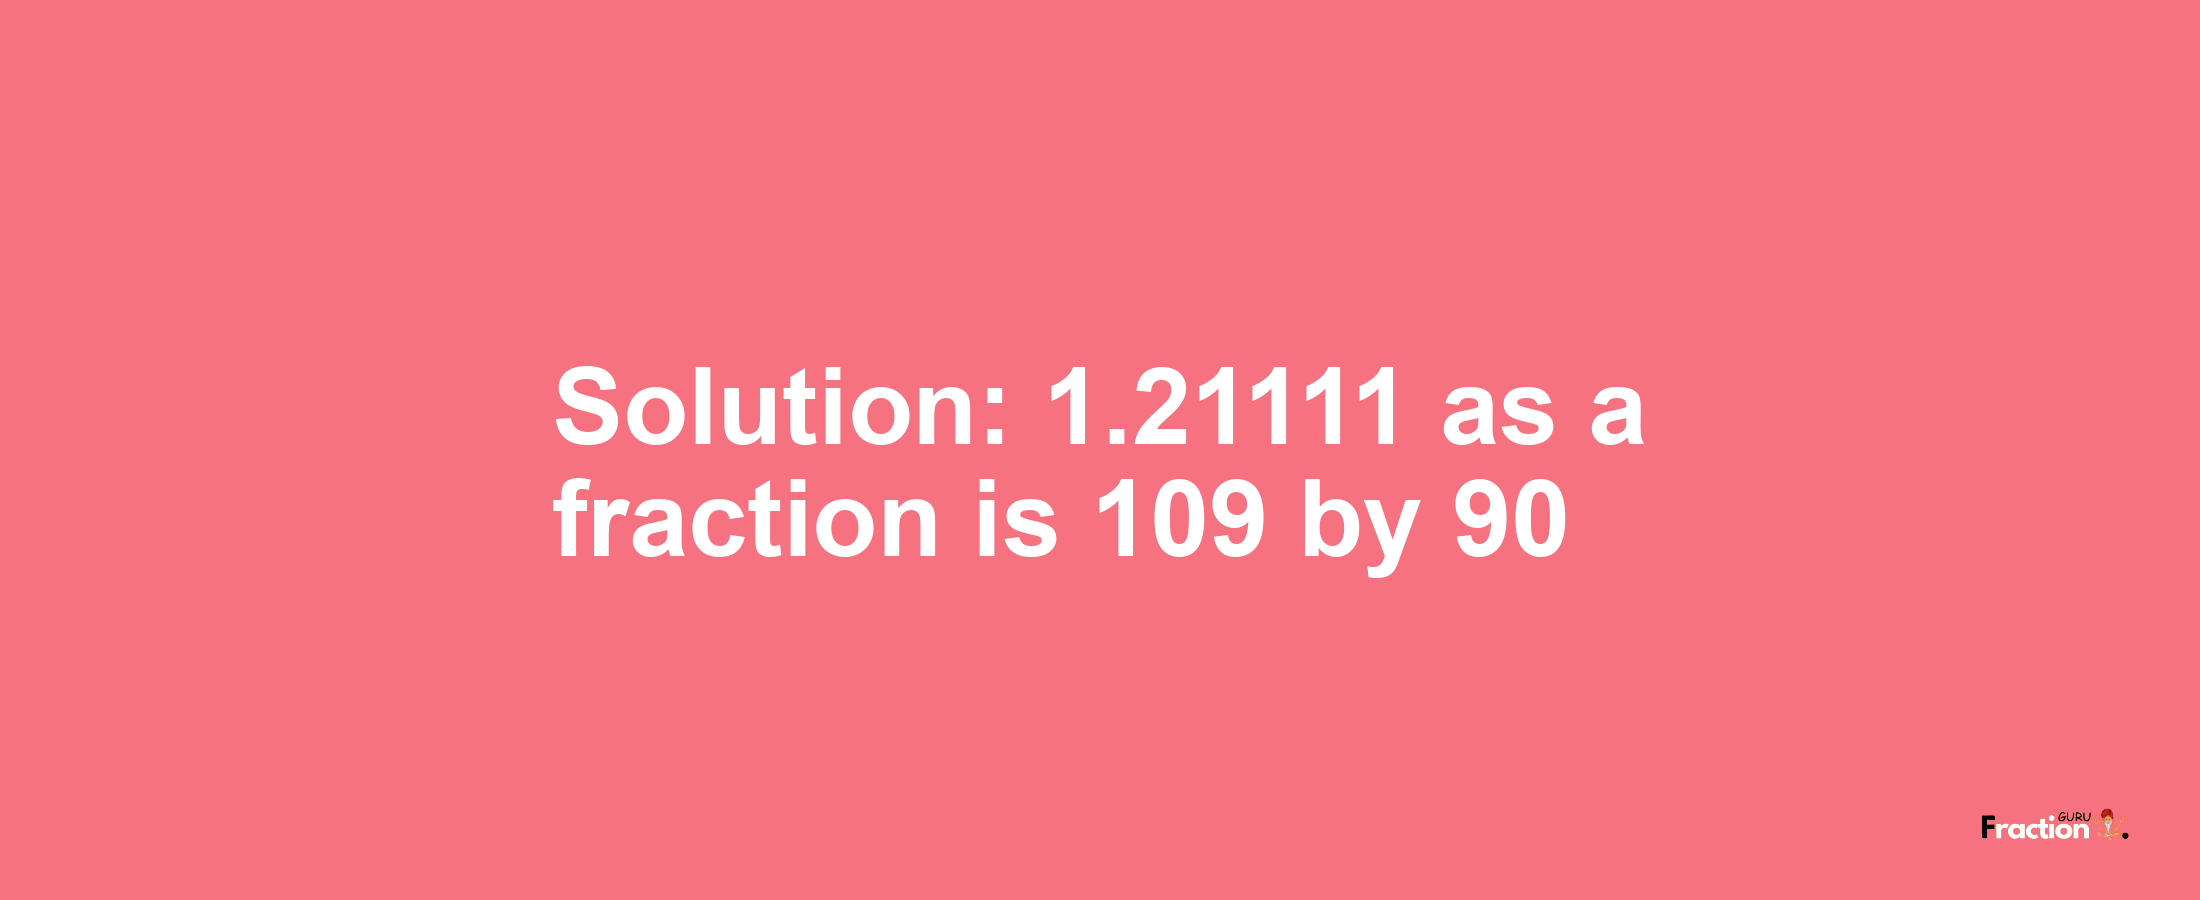 Solution:1.21111 as a fraction is 109/90